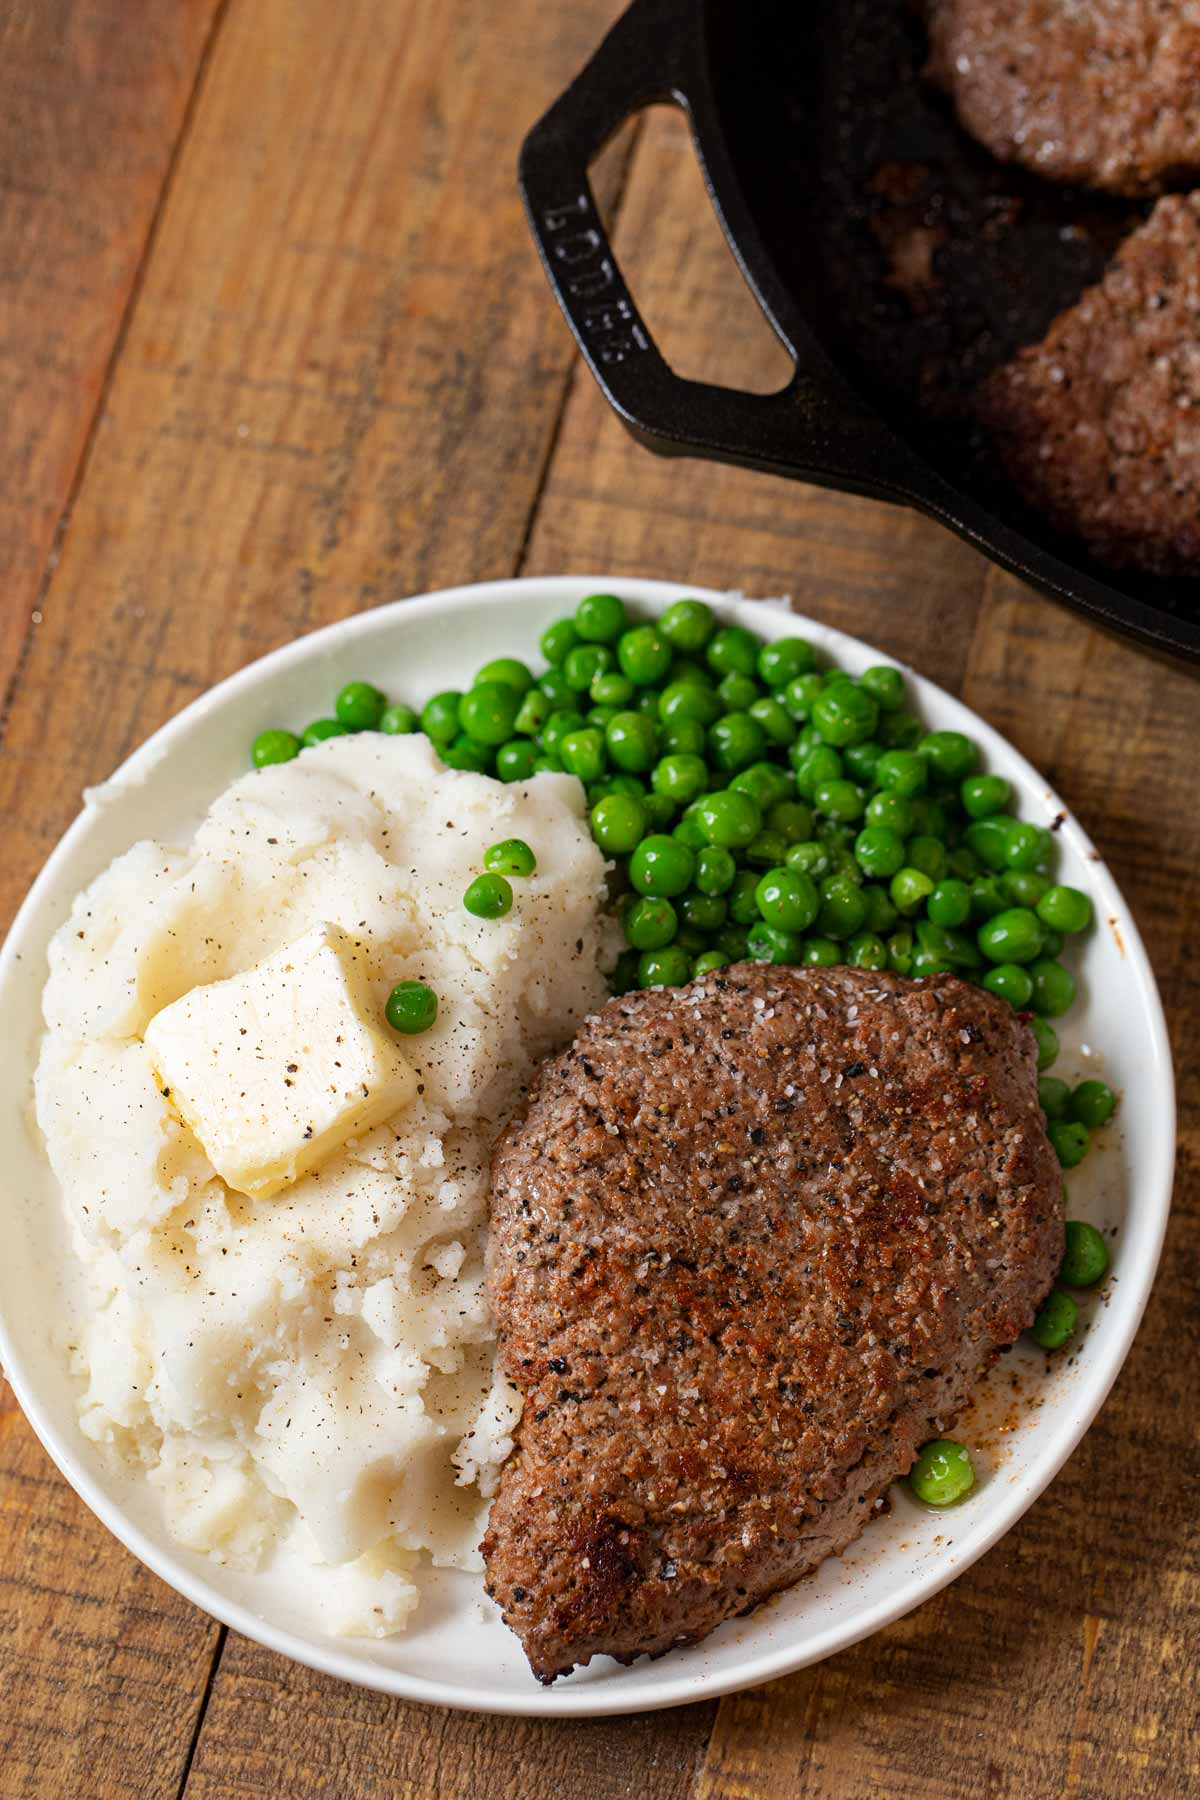 Seared Cube Steak on plate with mashed potatoes and peas